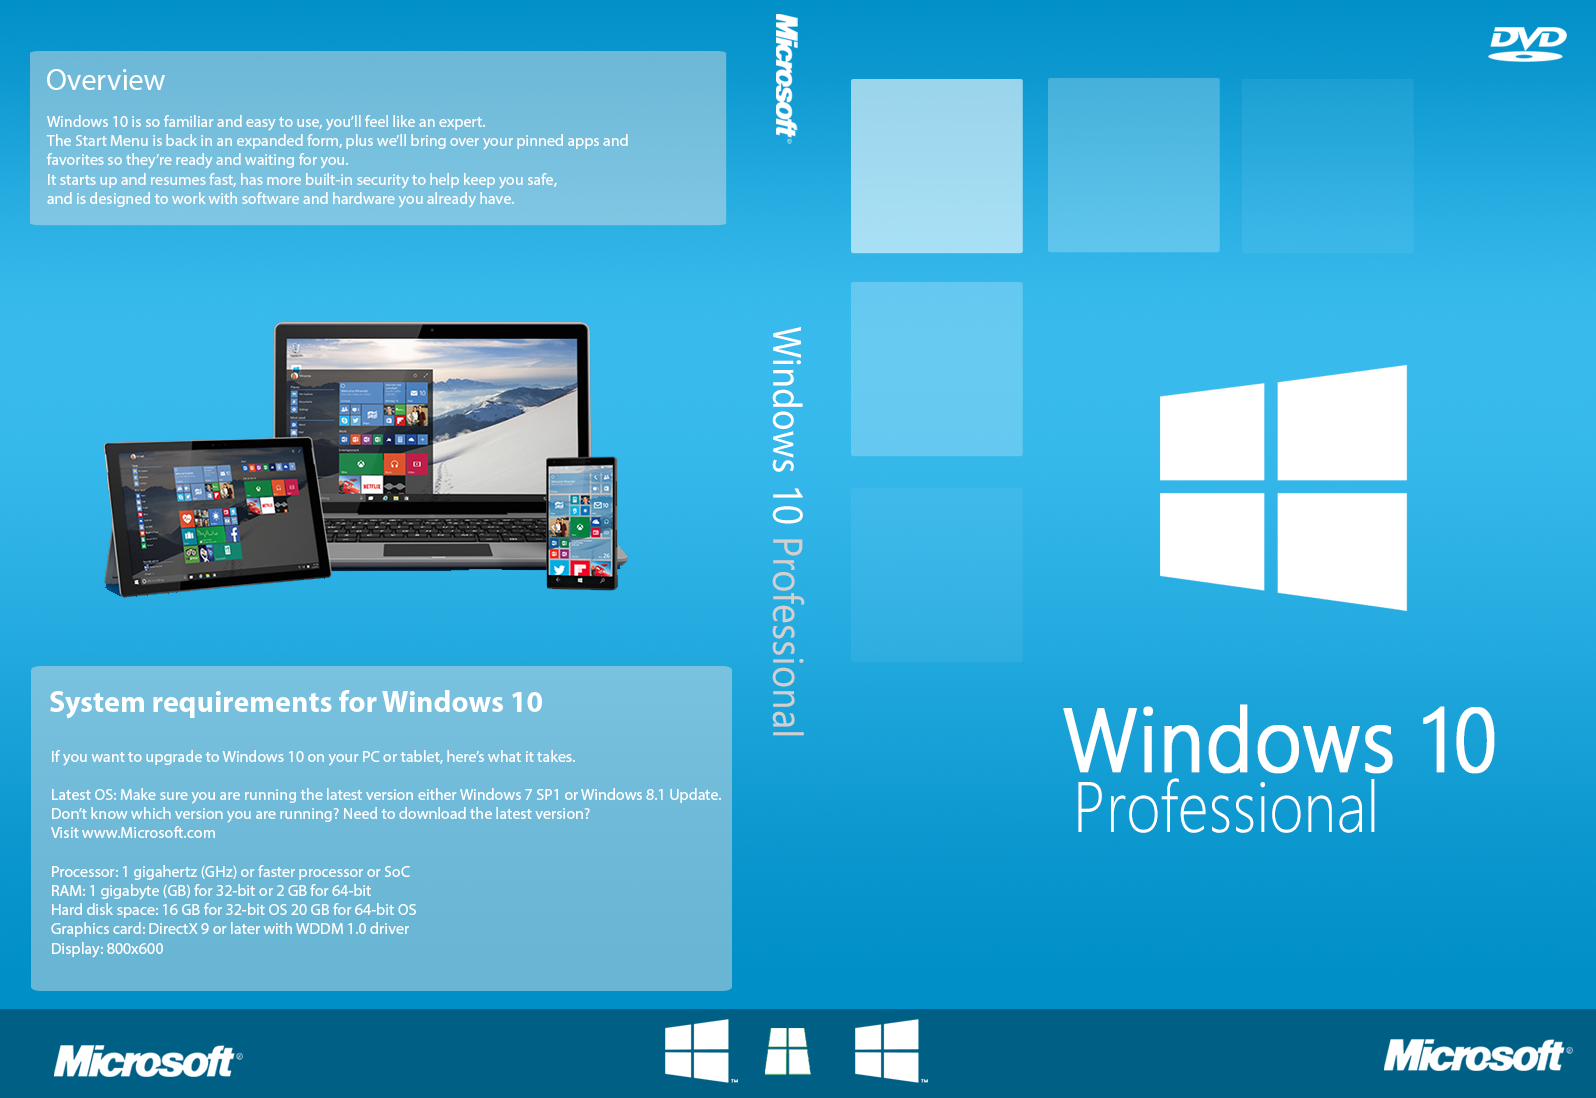 windows 10 pro dvd cover download